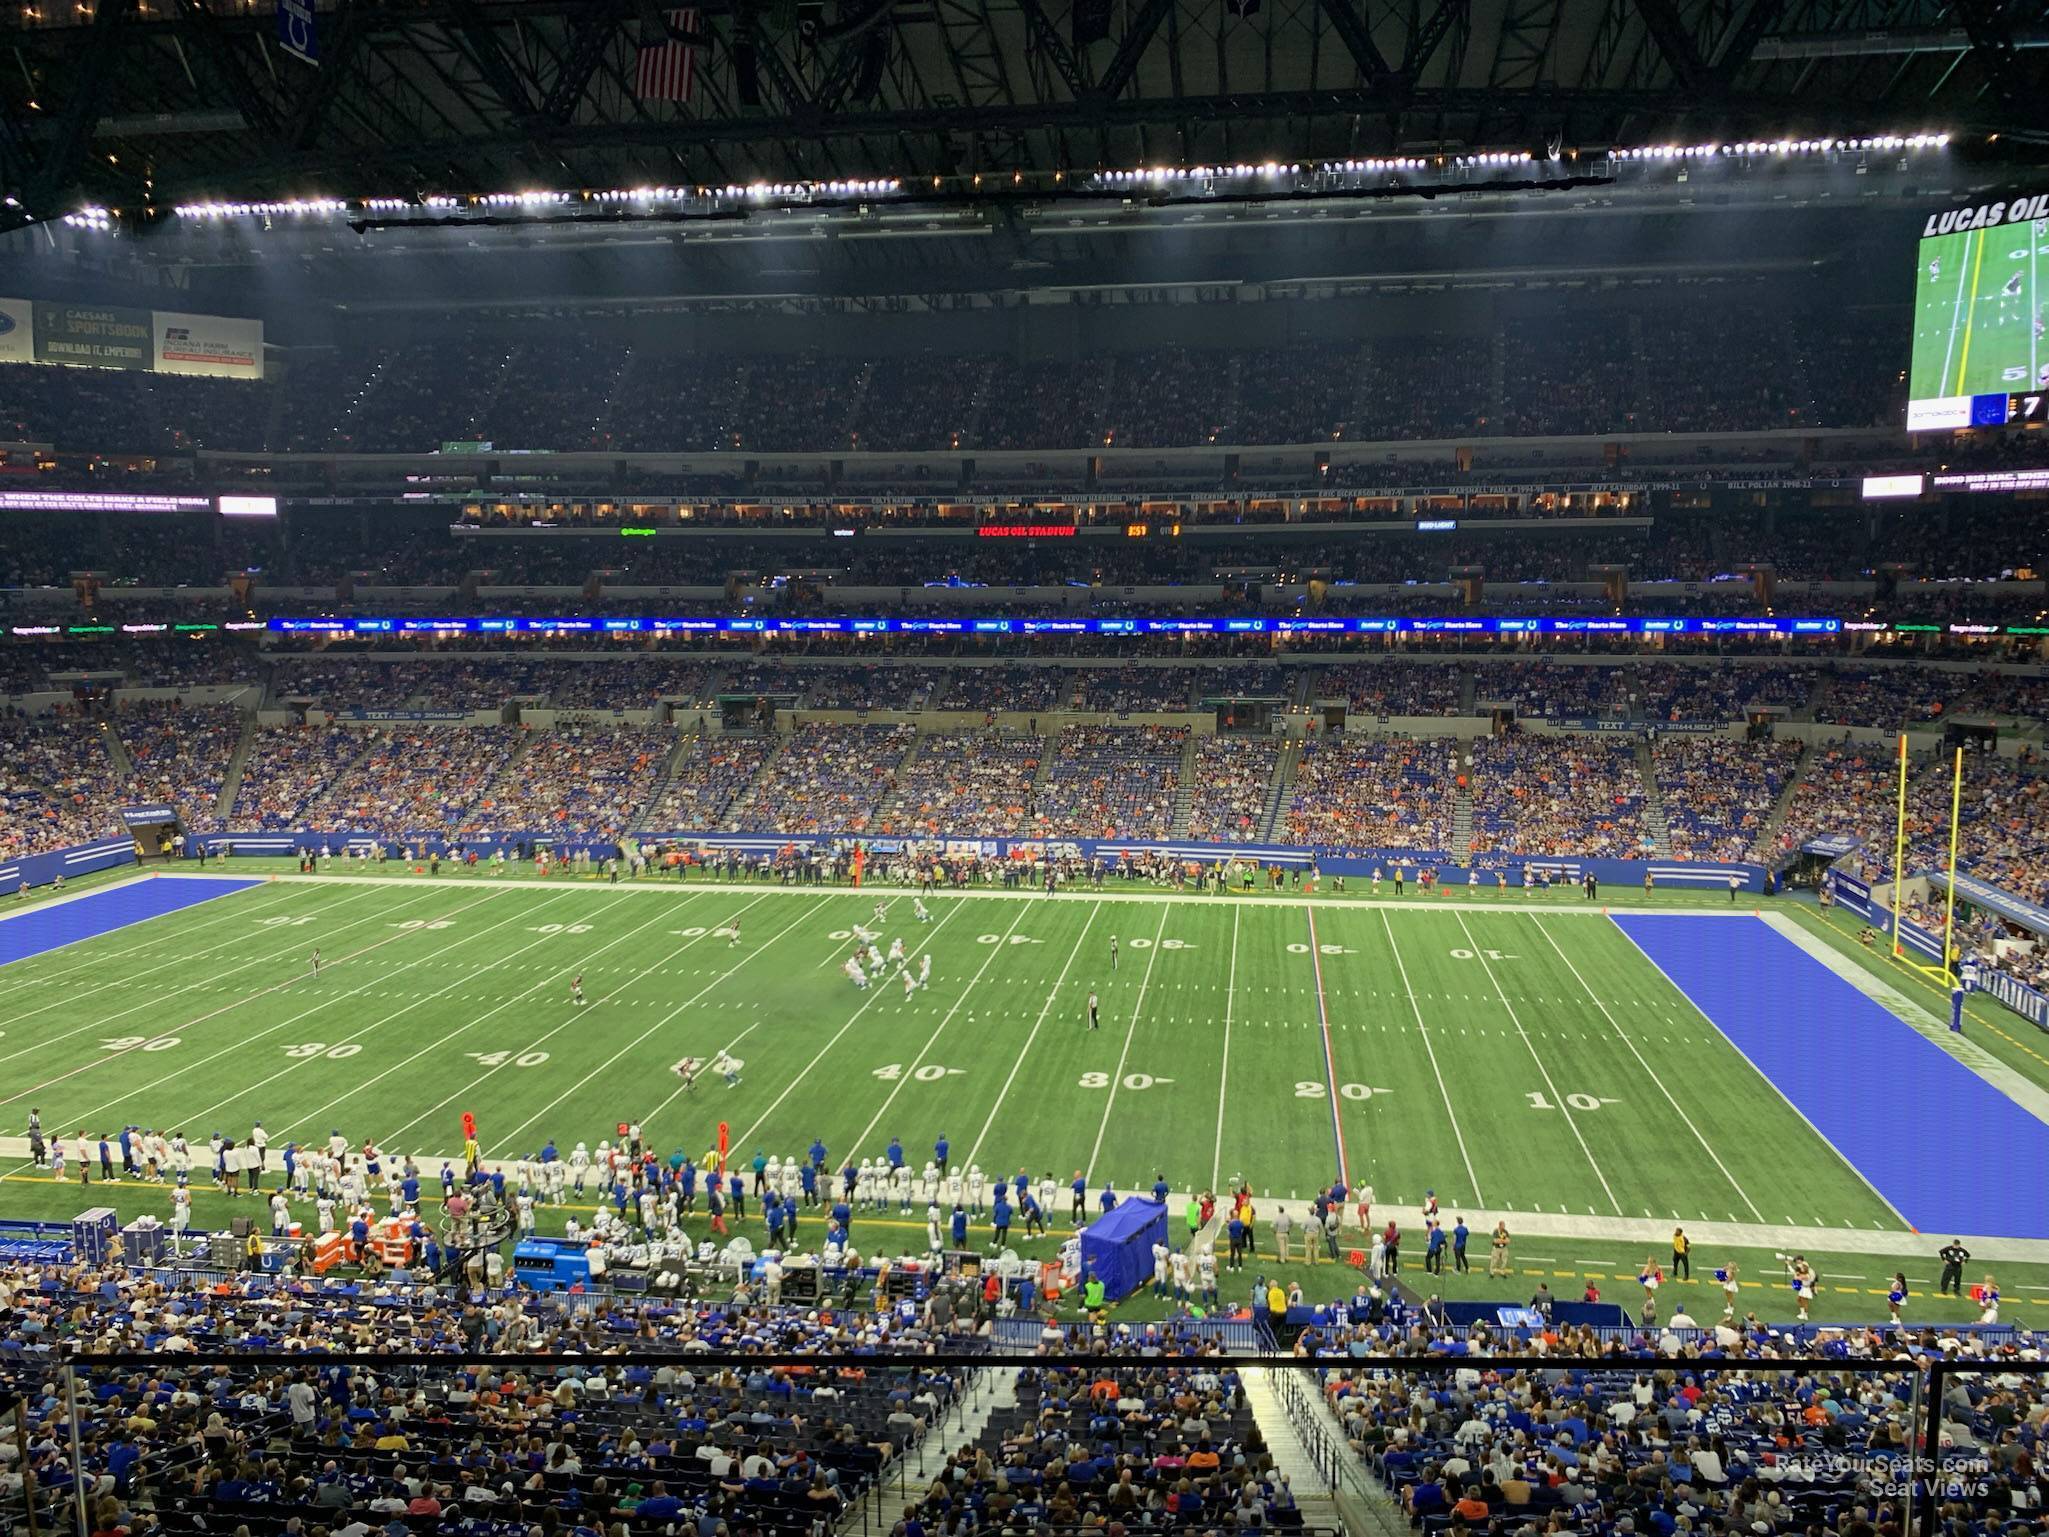 section 438, row 1 seat view  for football - lucas oil stadium